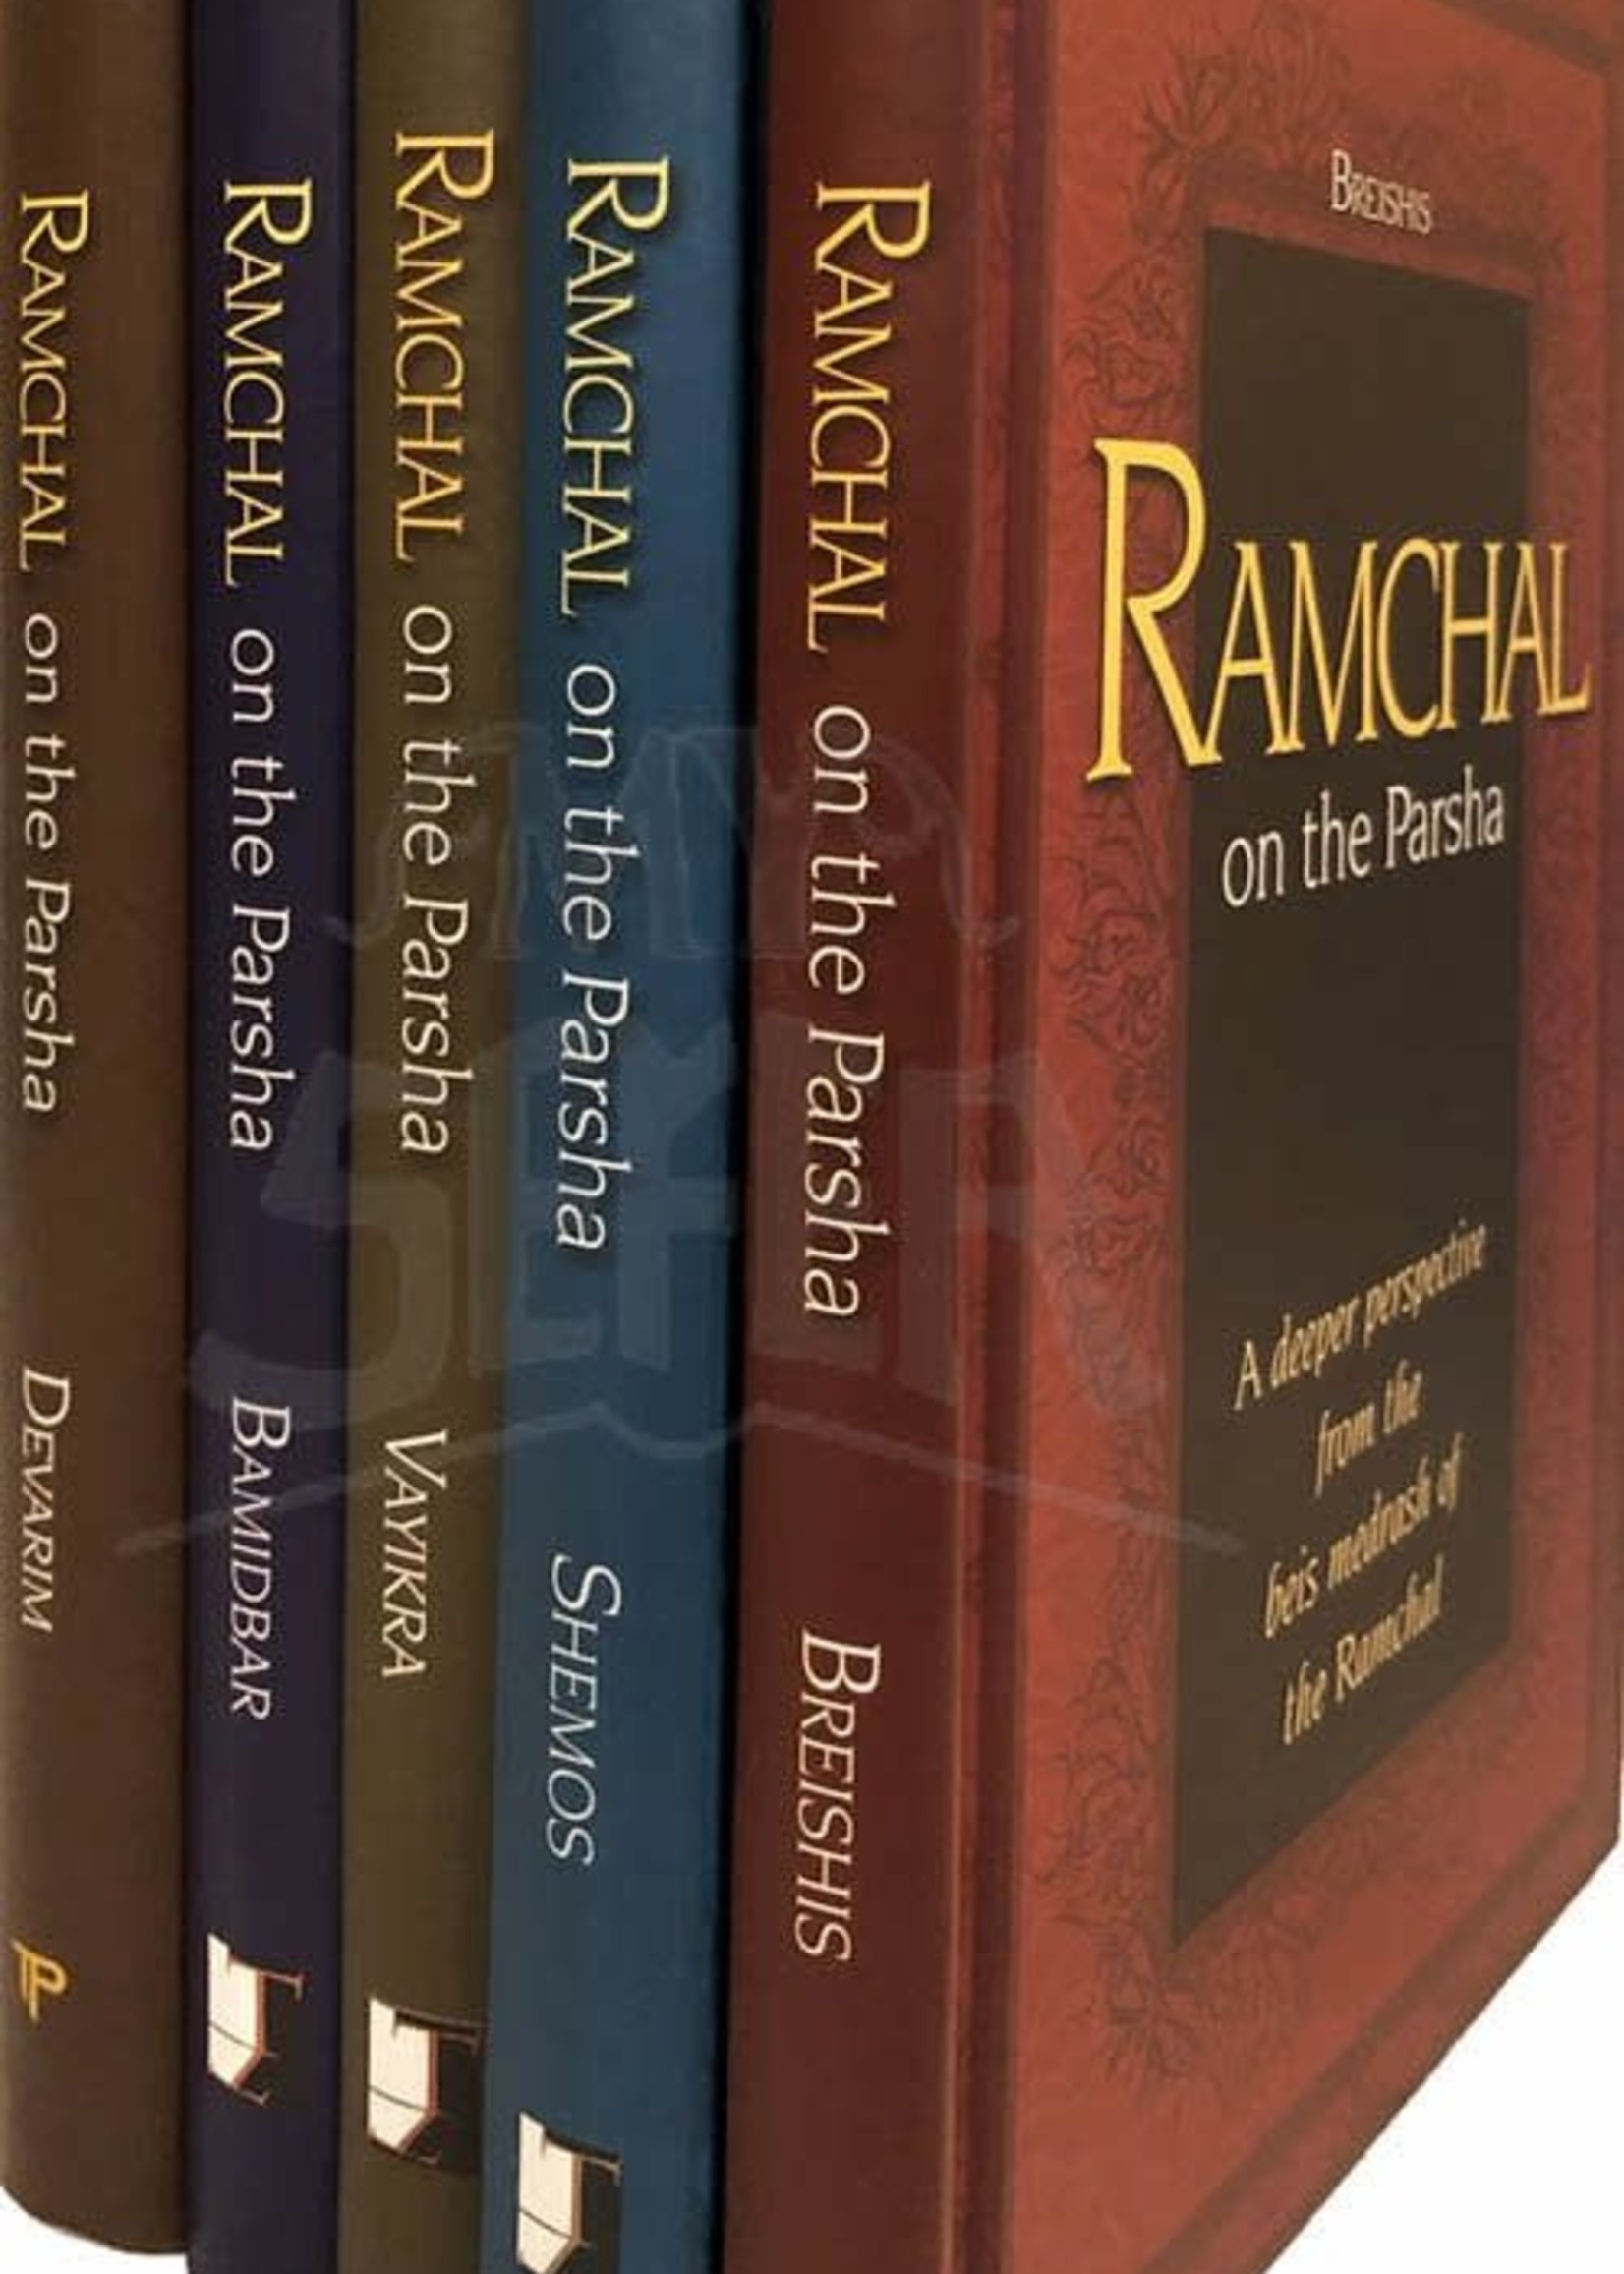 Ramchal on the Parsha - Complete Set